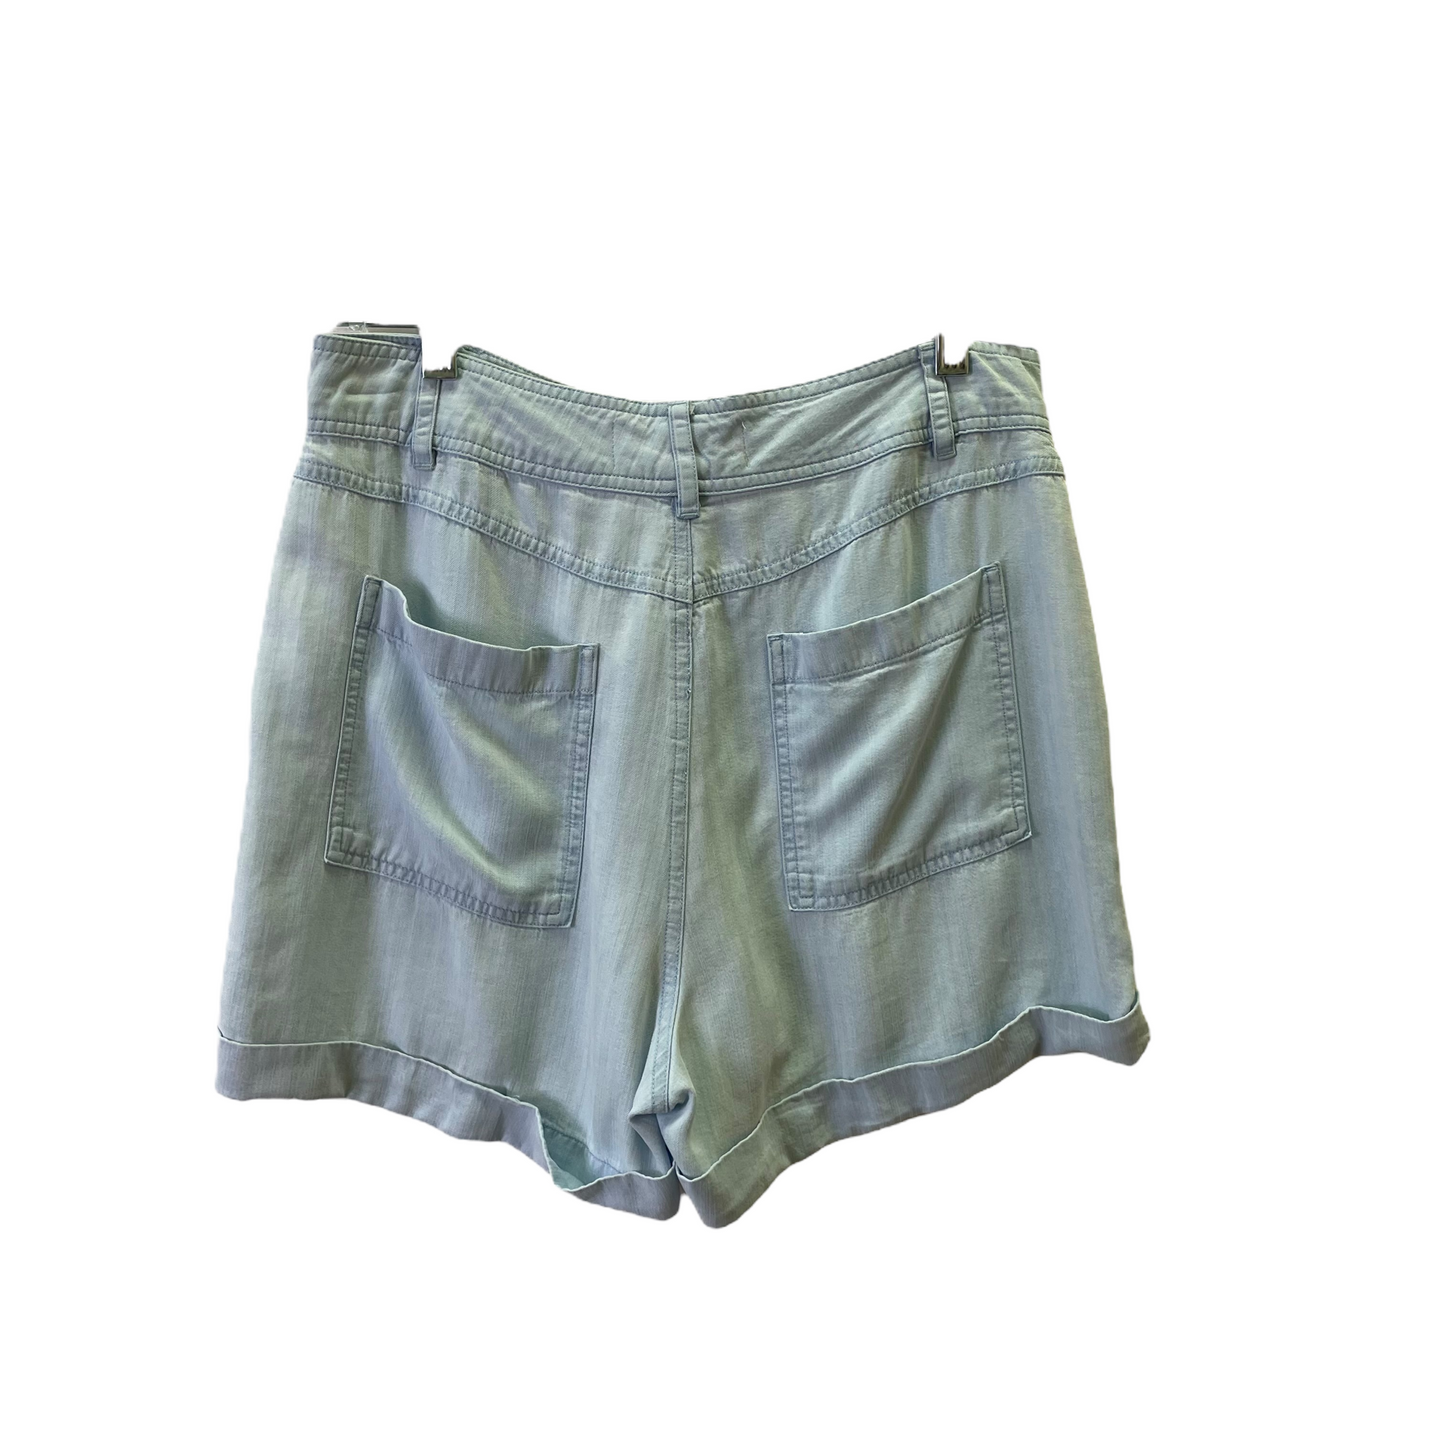 Baby Blue Shorts By Cloth And Stone, Size: S